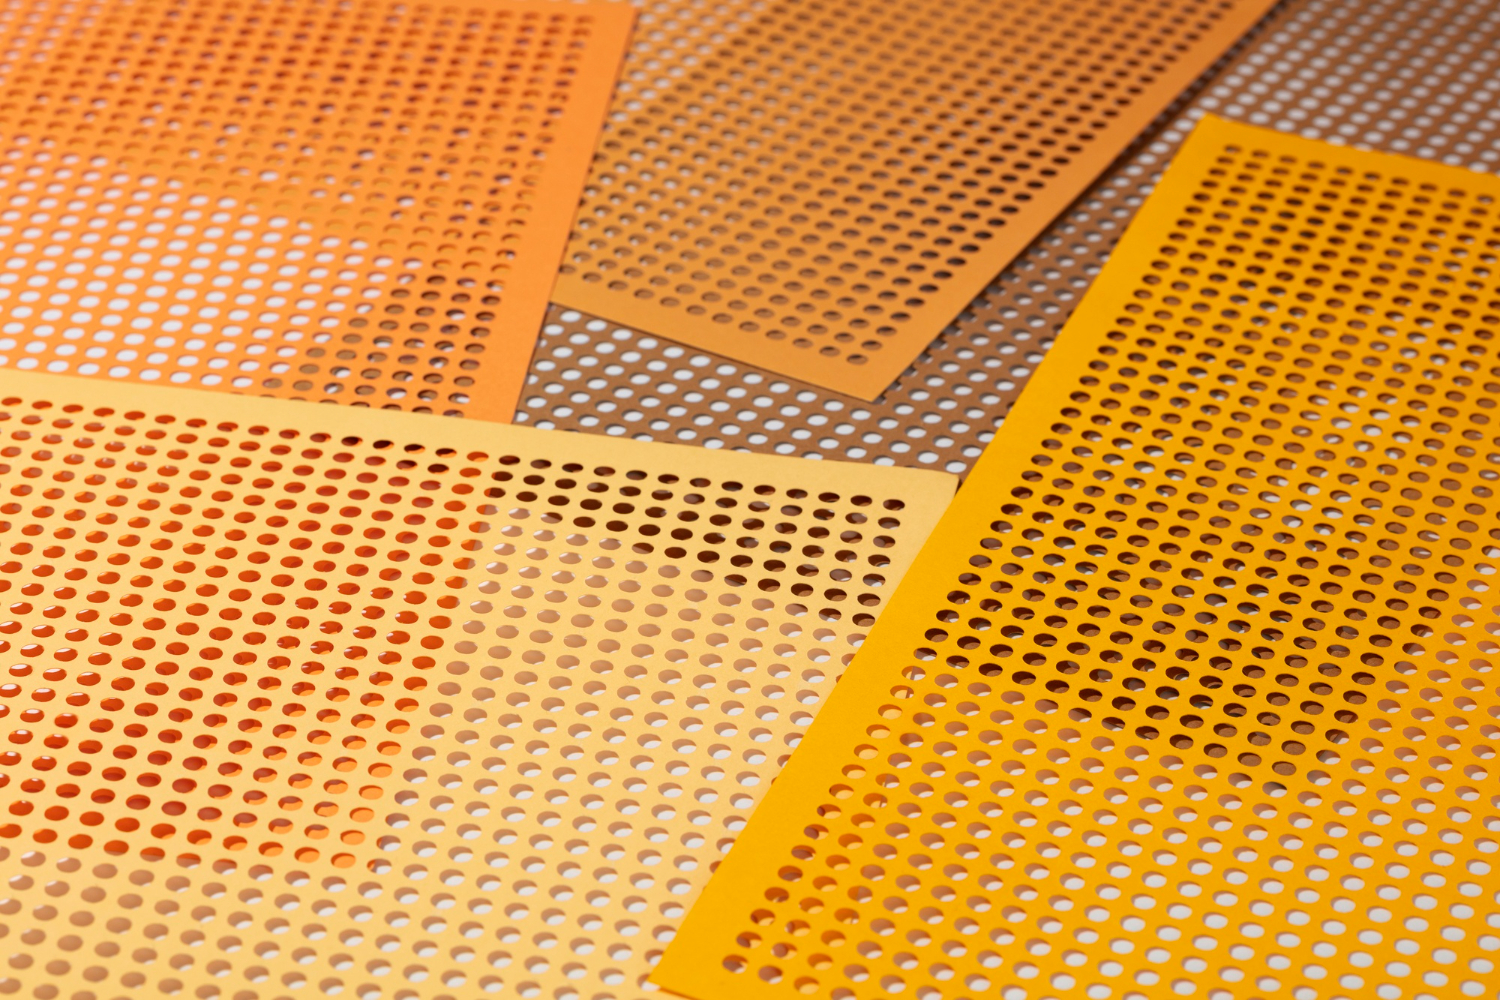 Yellow and orange nonslip bathmats lay on a white floor. The mats are made of nonslip silicone and have holes throughout to allow for water drainage.